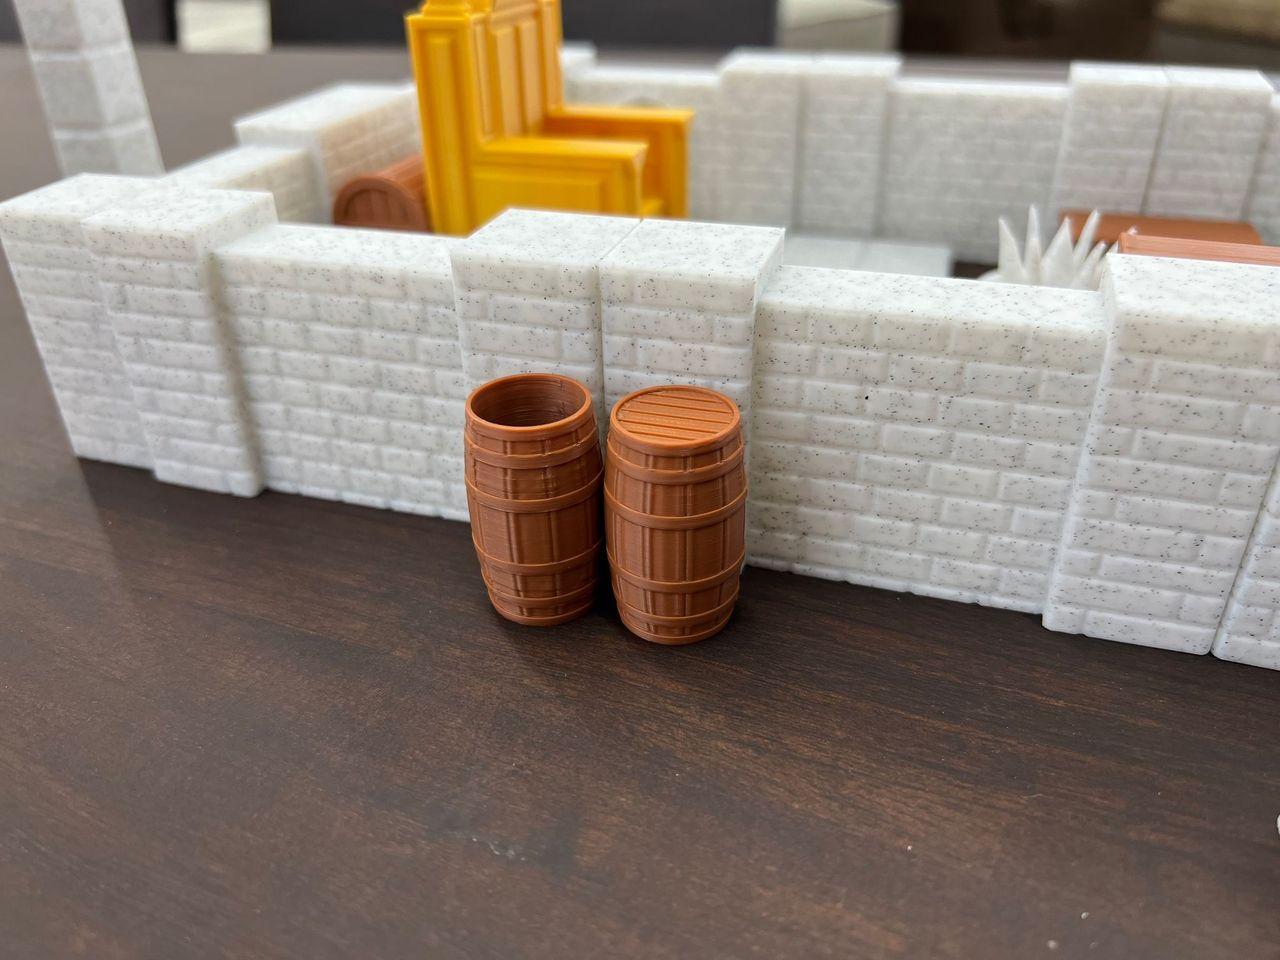 Tabletop gaming barrel - Open and Closed - Print in place 3d model